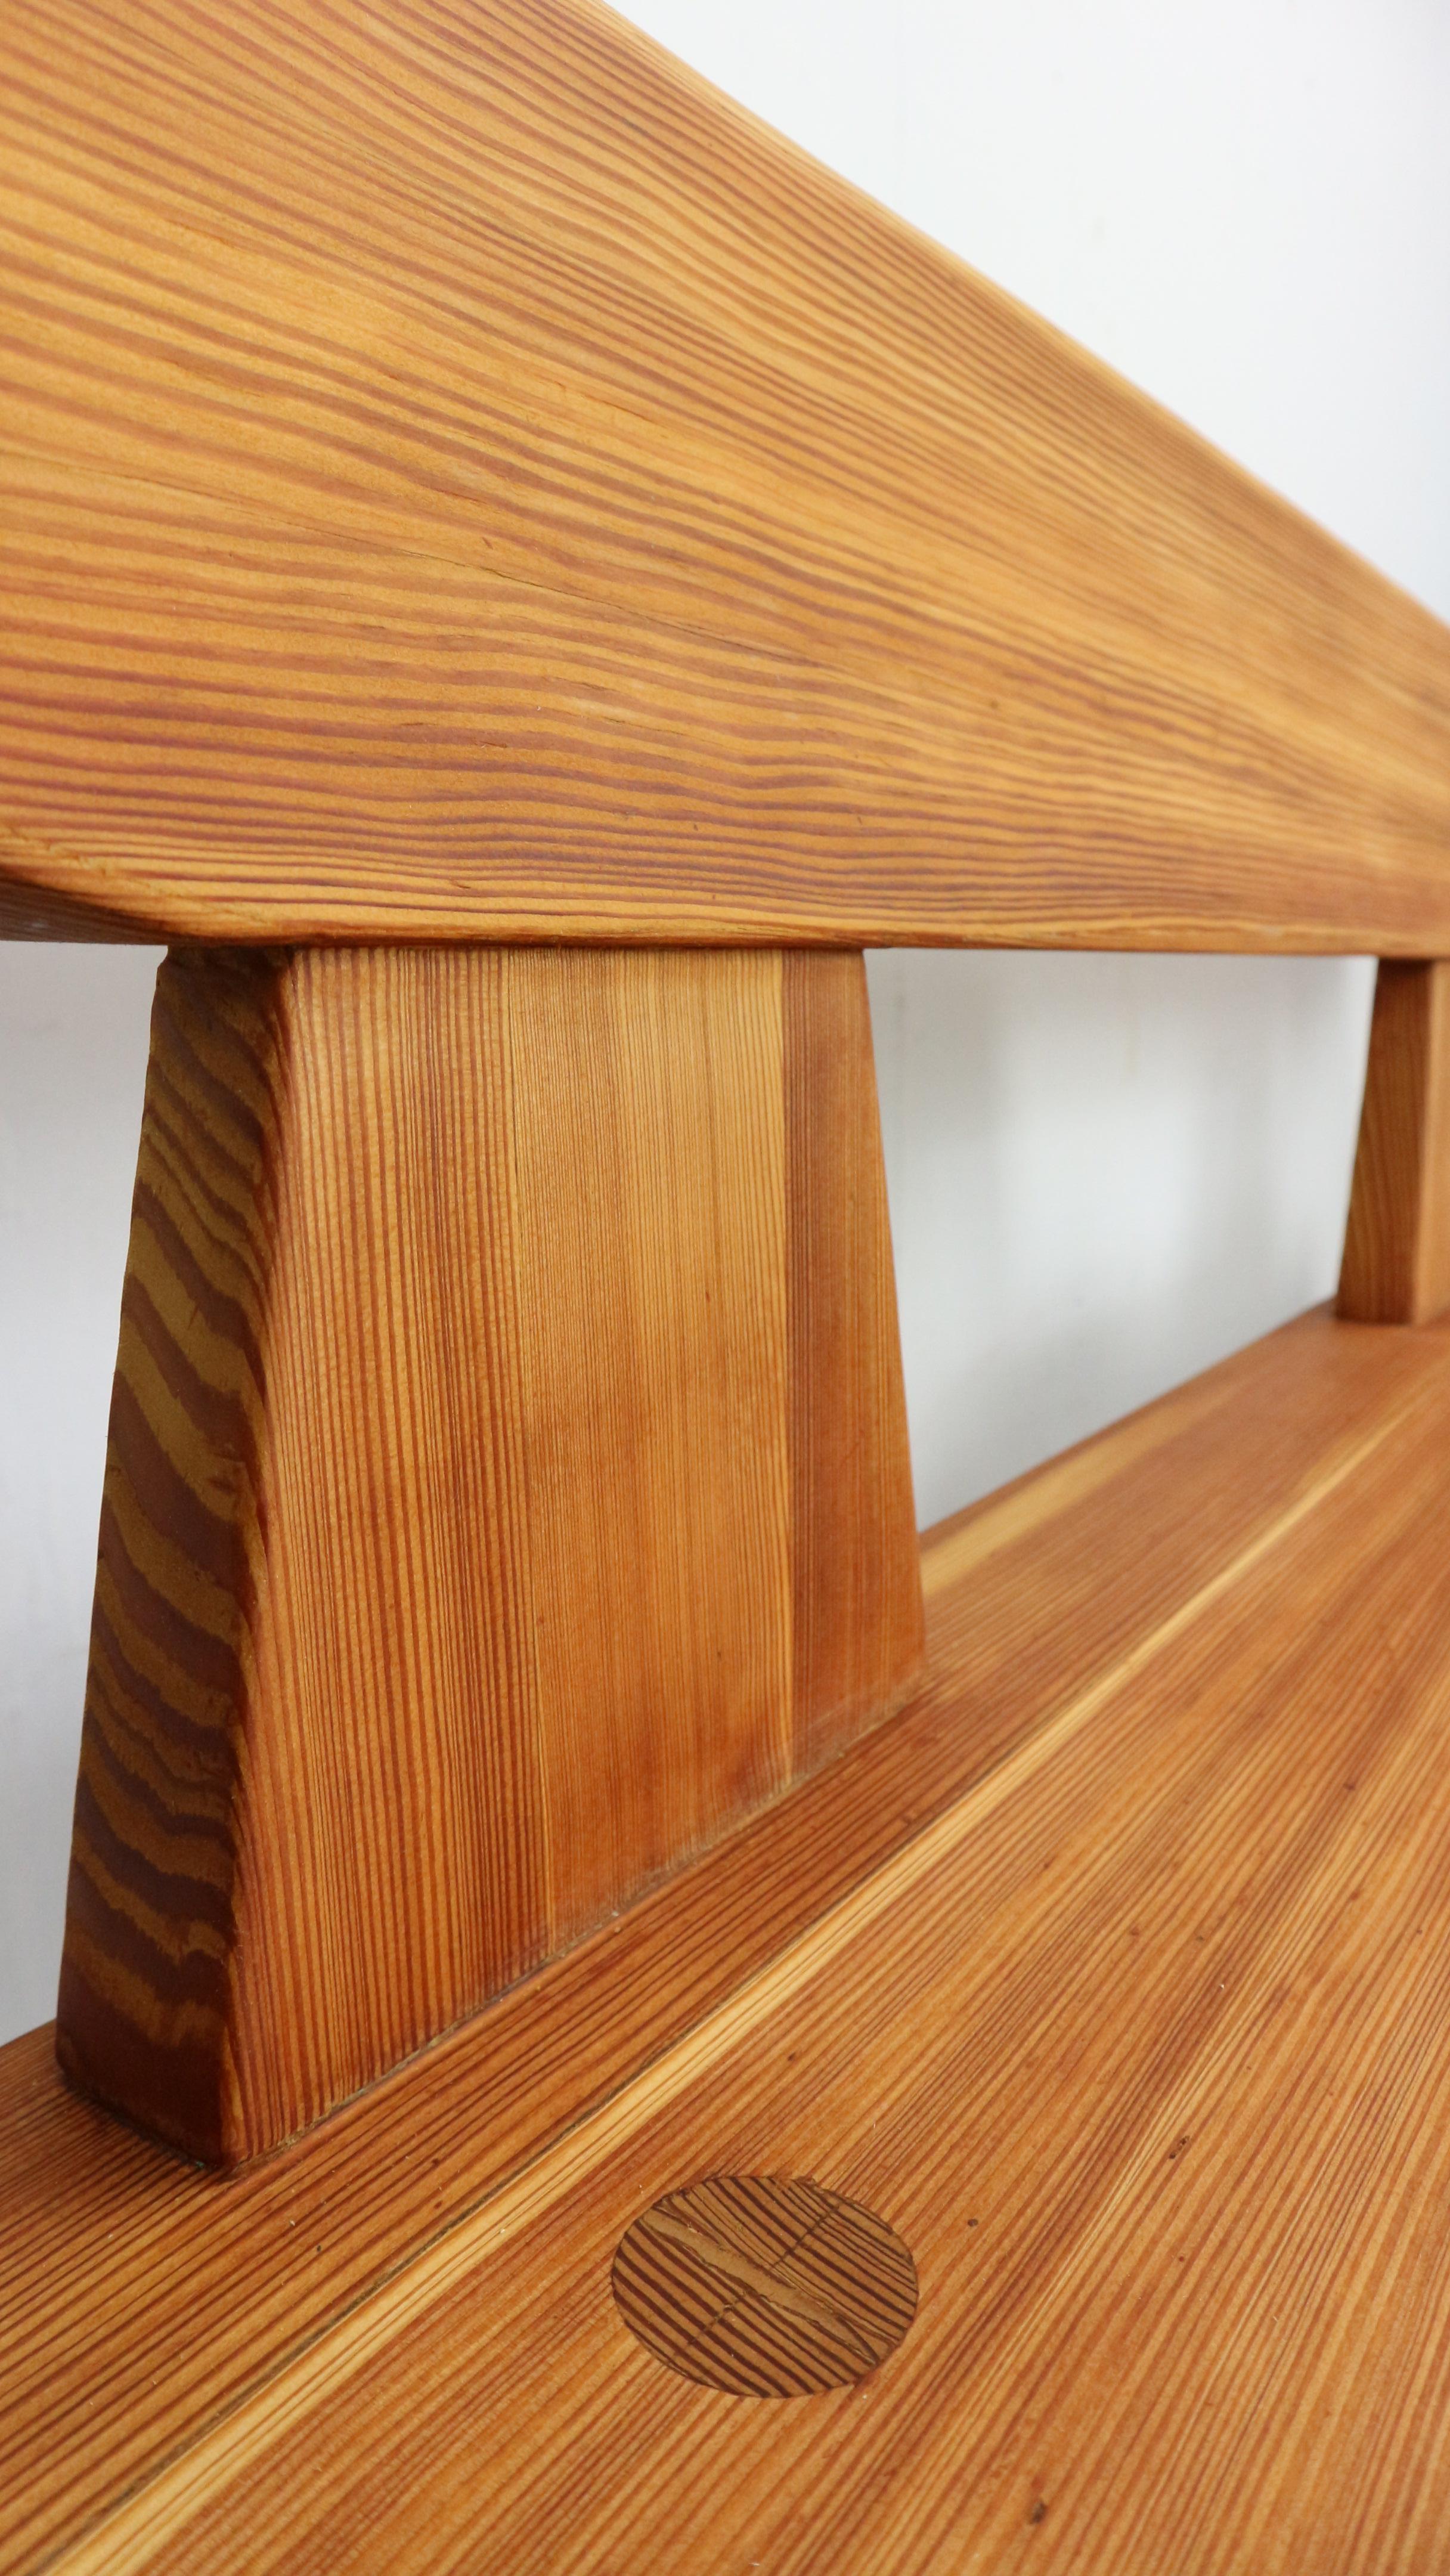 Jacob Kielland Brandt Bench in Pine Wood for Christiansen, Handcrafted, 1960s For Sale 3